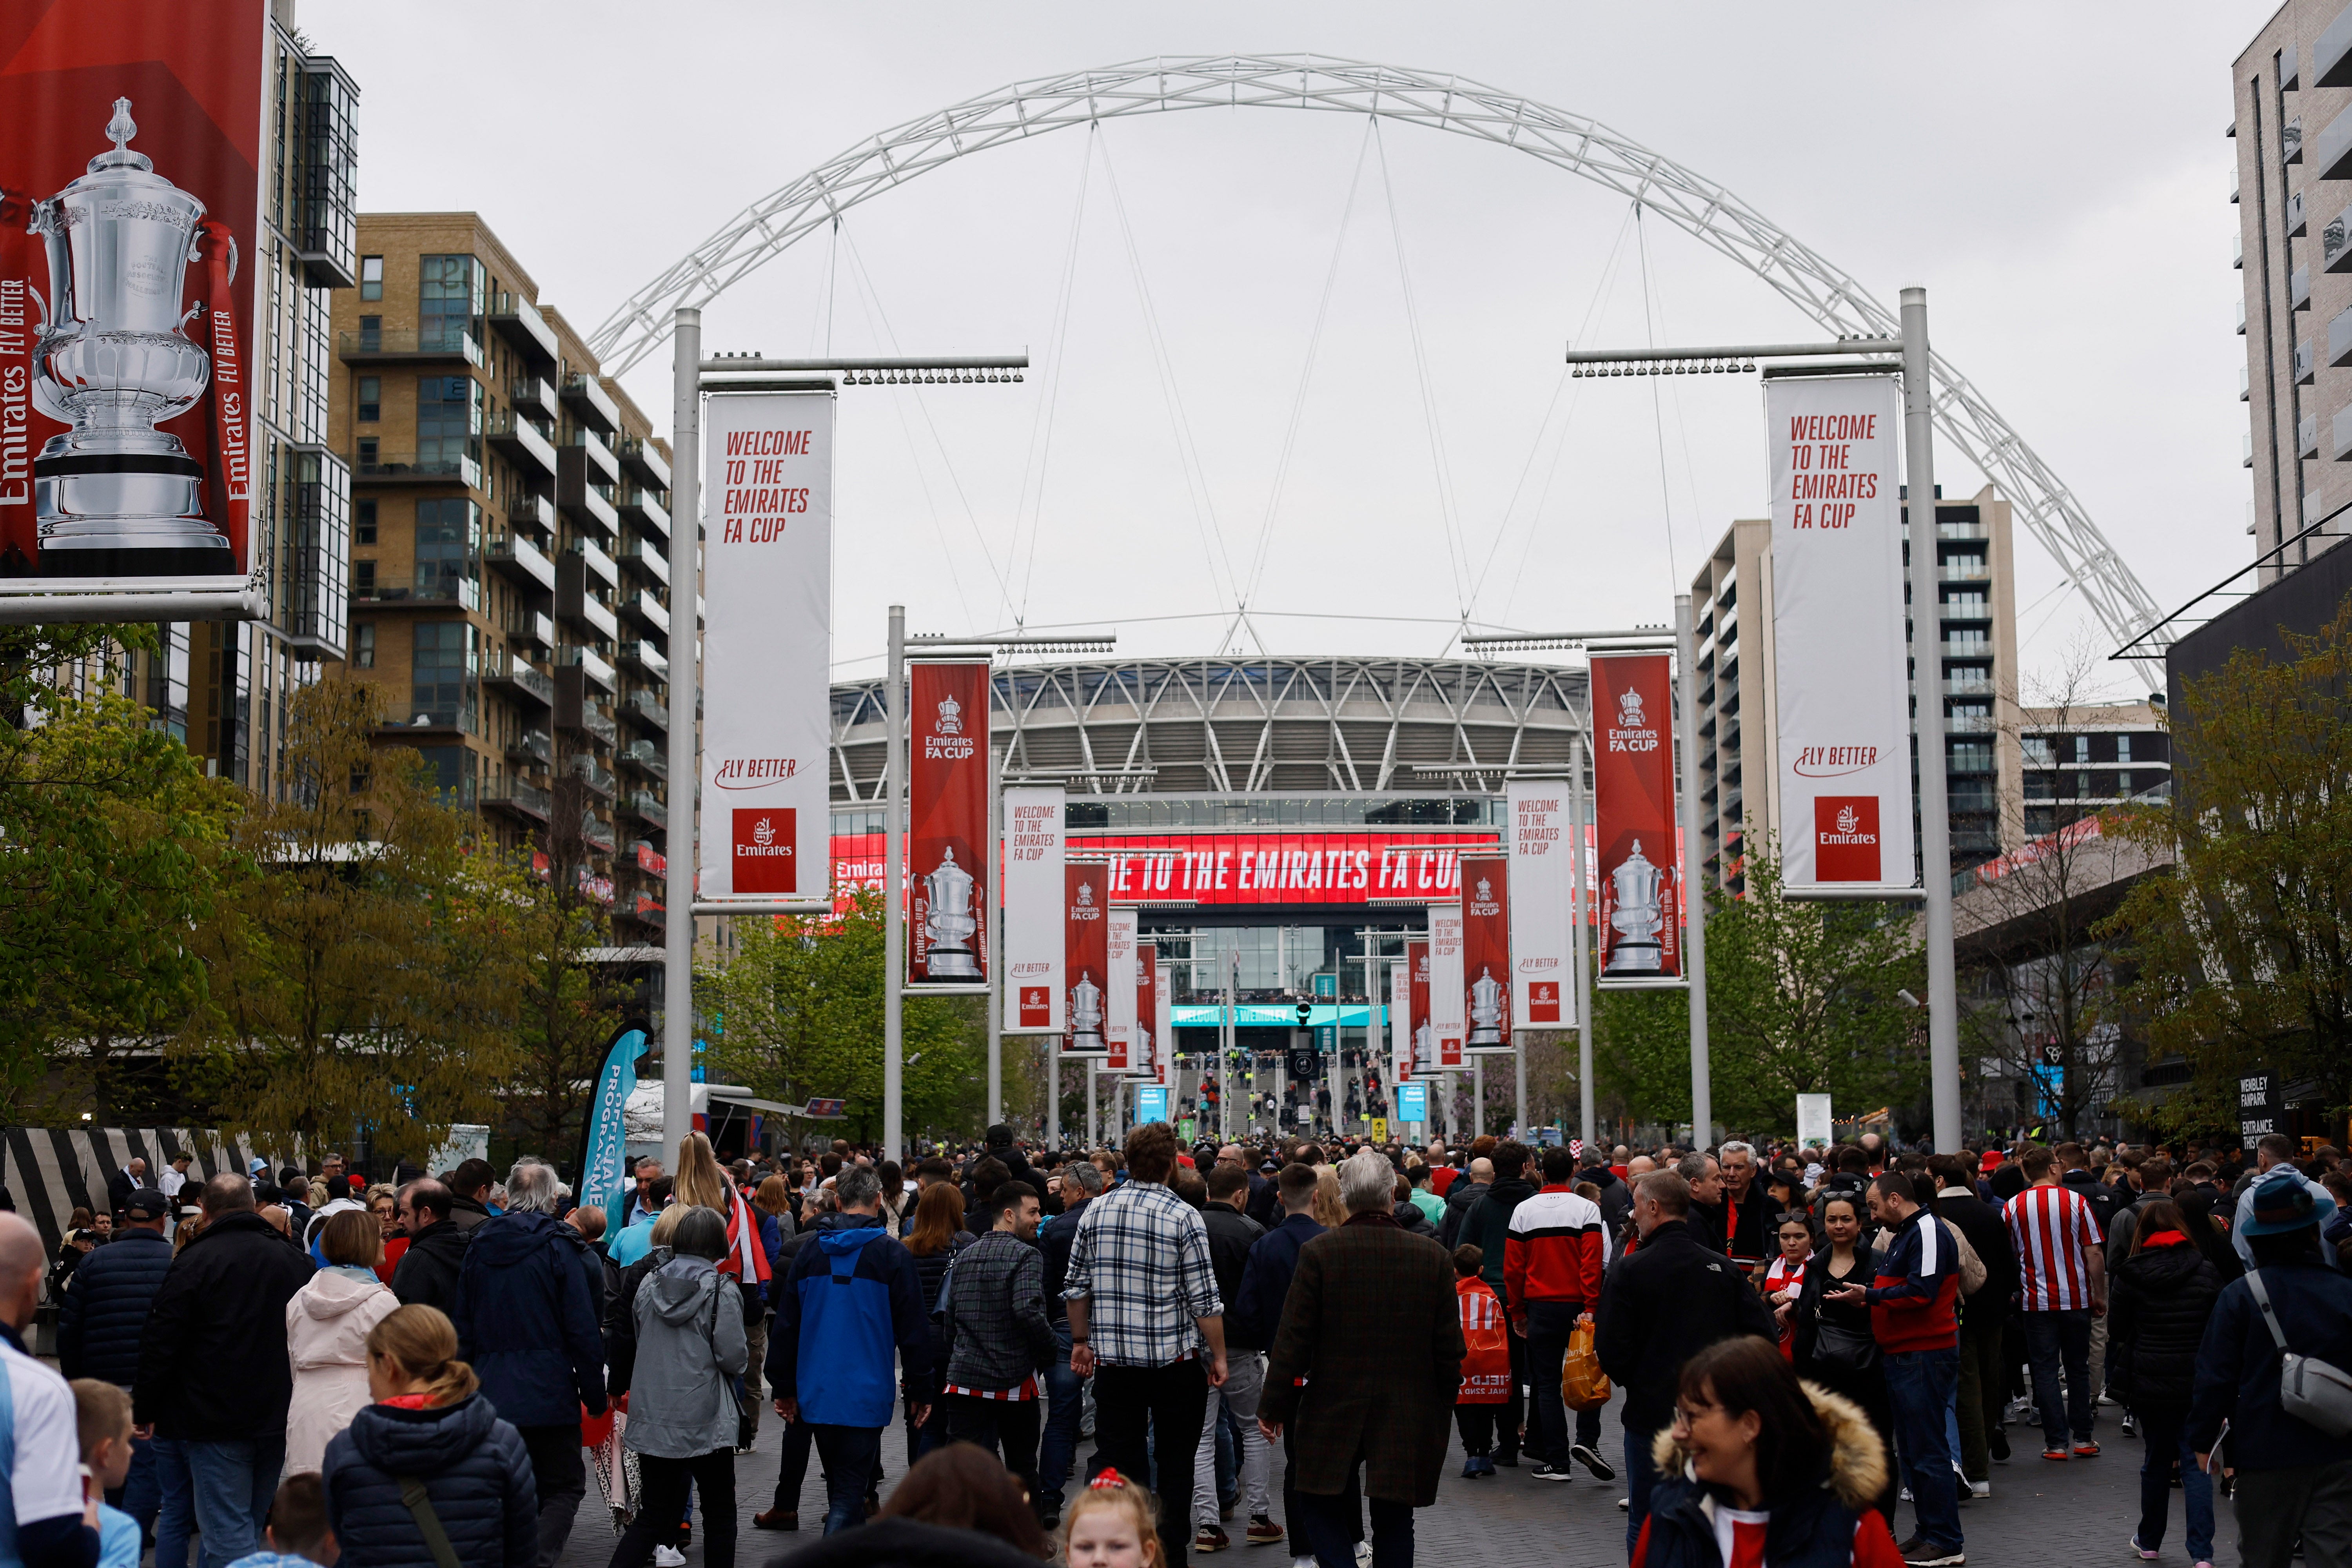 Wembley Stadium will host the FA Cup final on 3 June